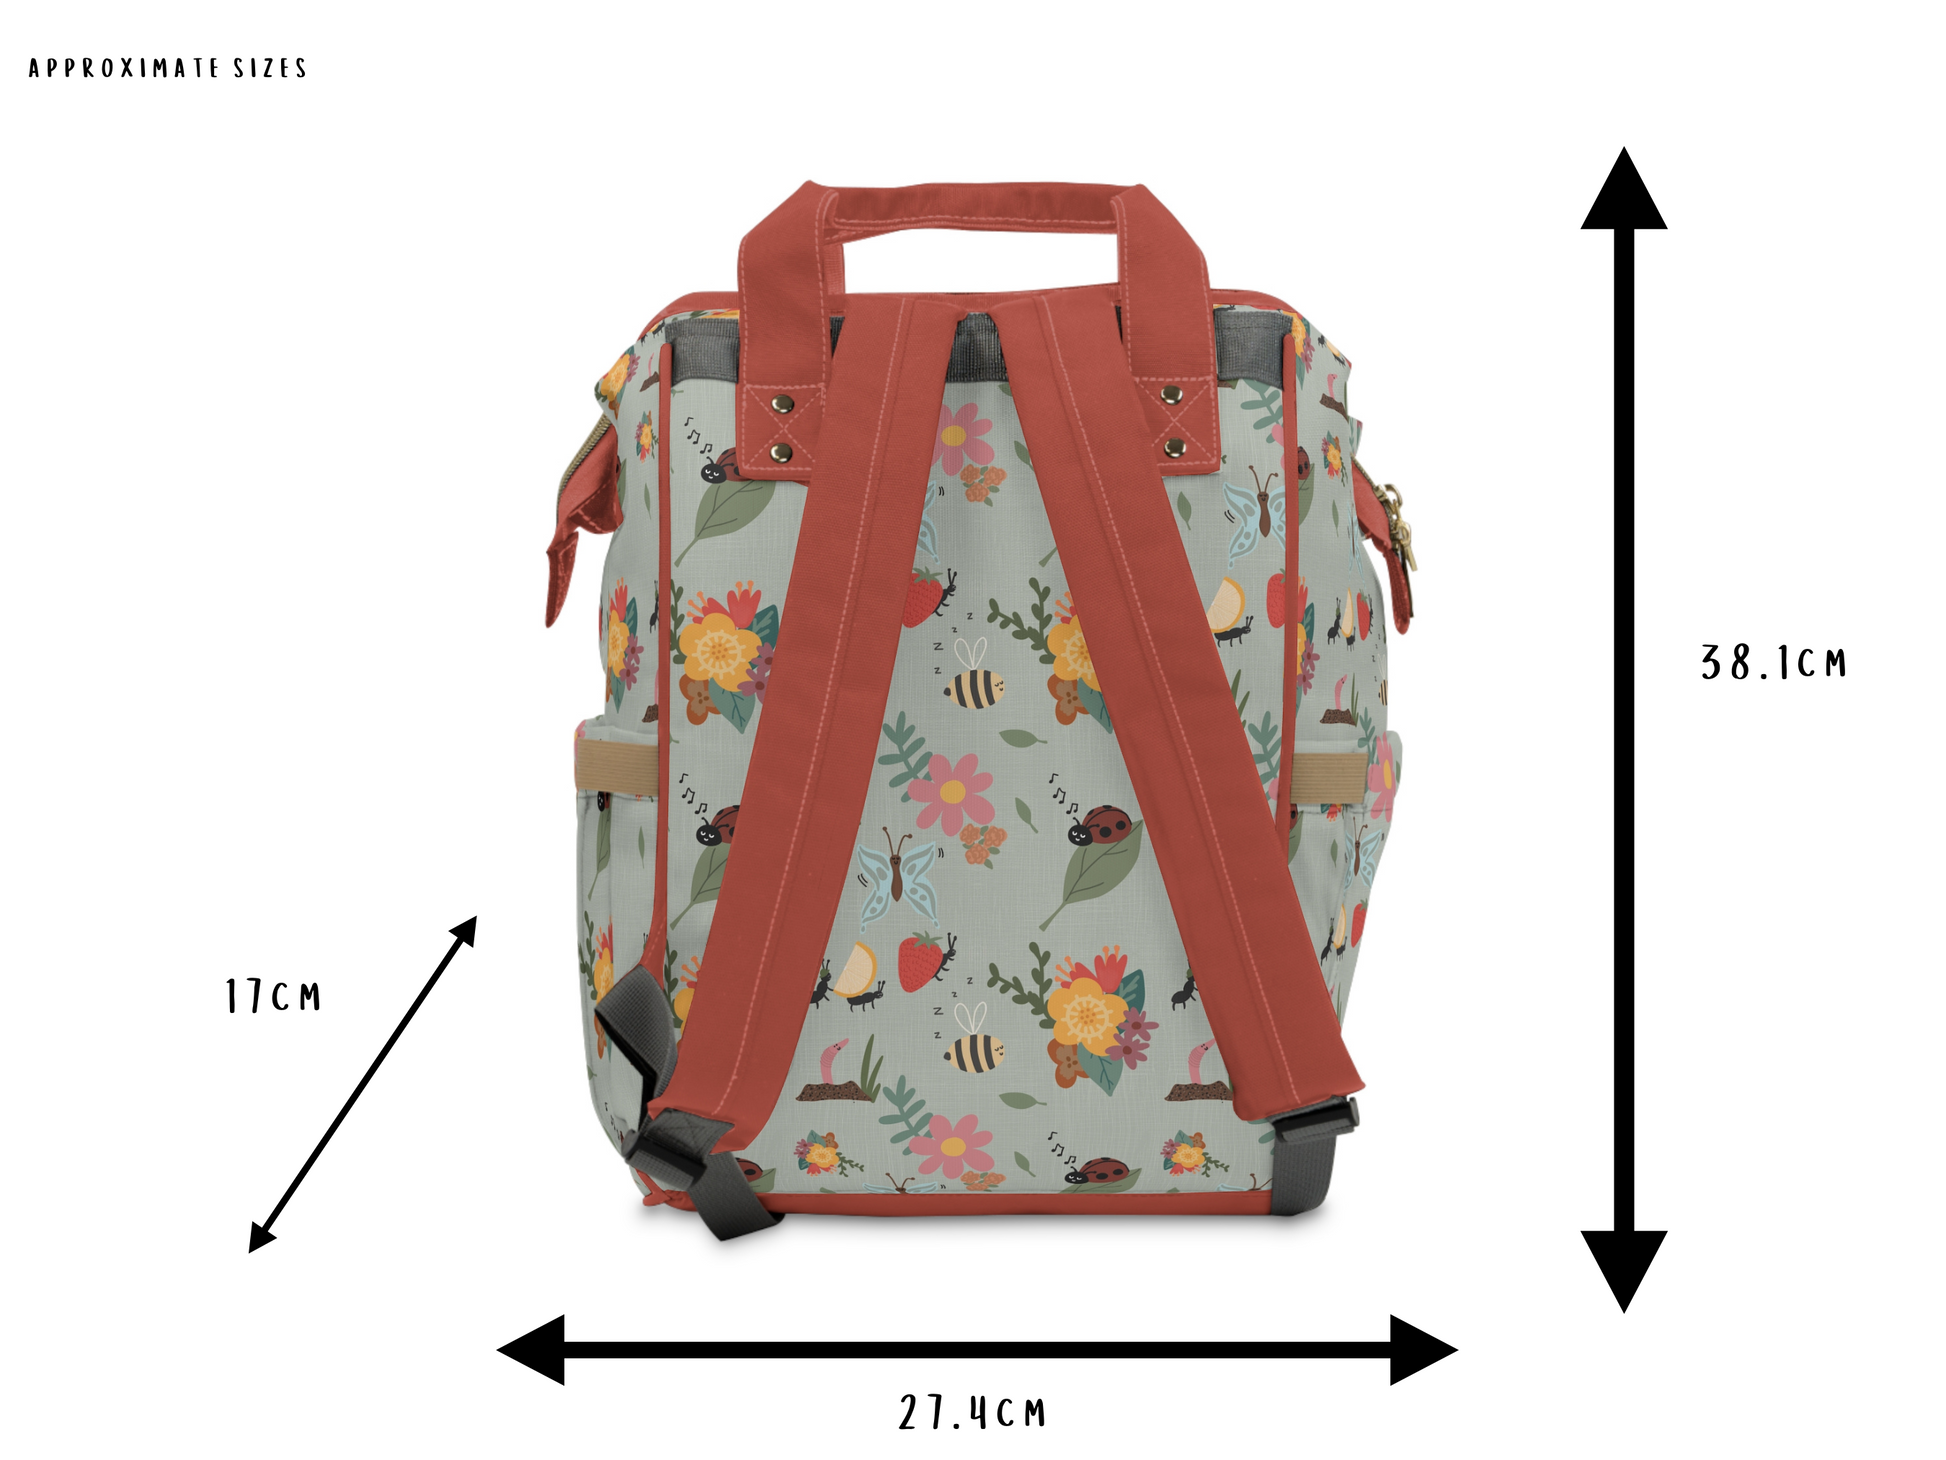 Insect-themed unique baby changing backpack with charming bug illustrations.